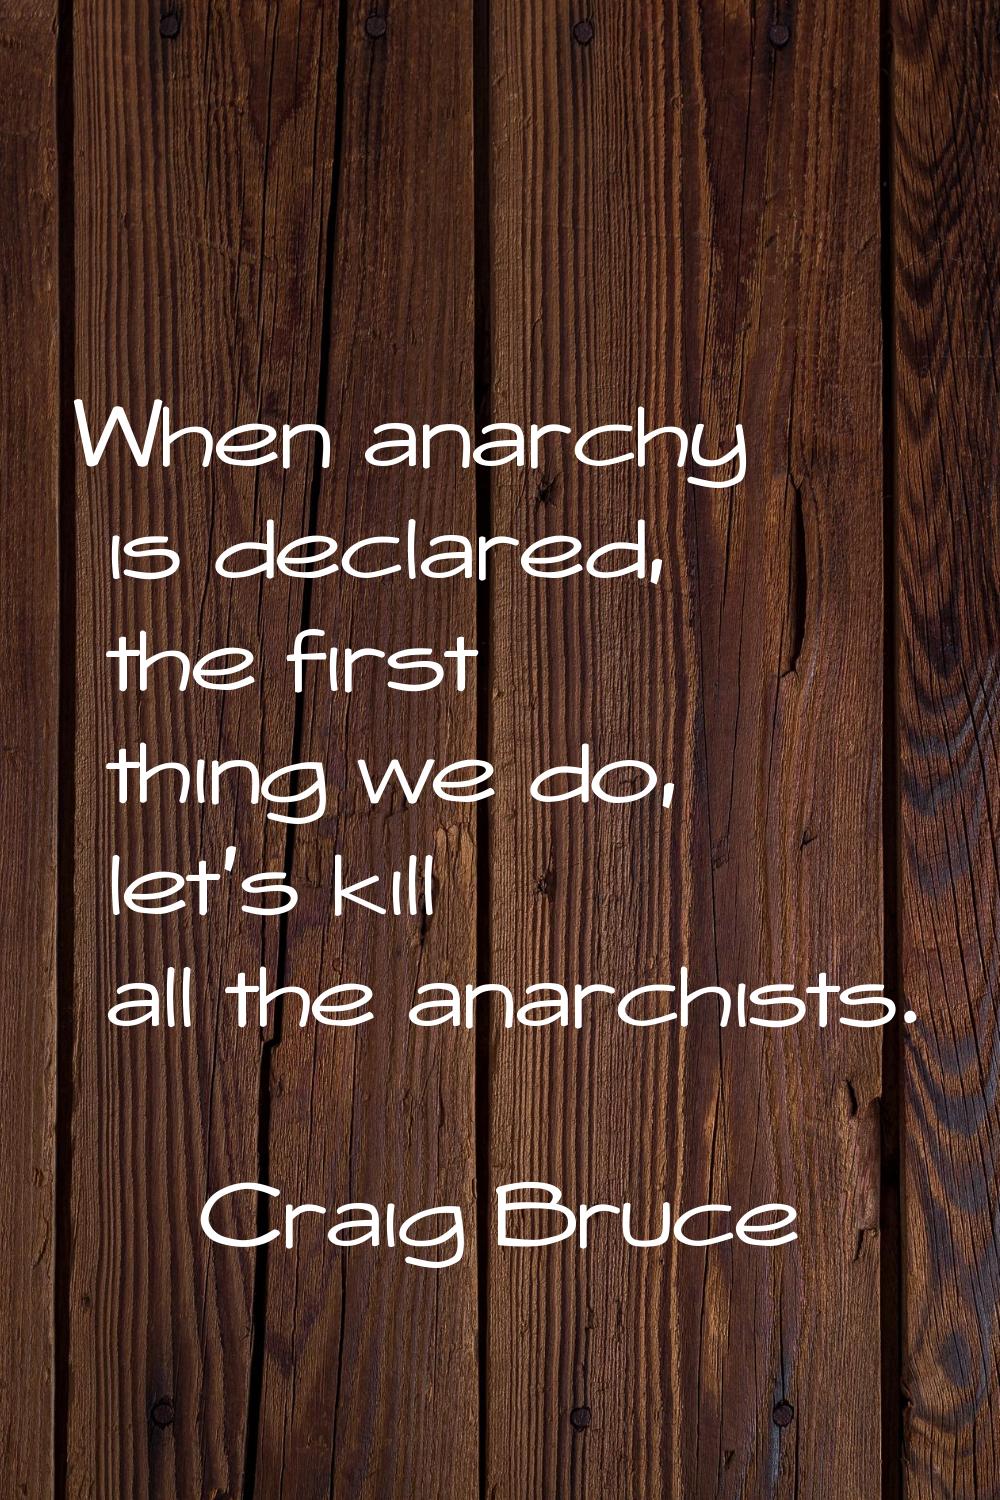 When anarchy is declared, the first thing we do, let's kill all the anarchists.